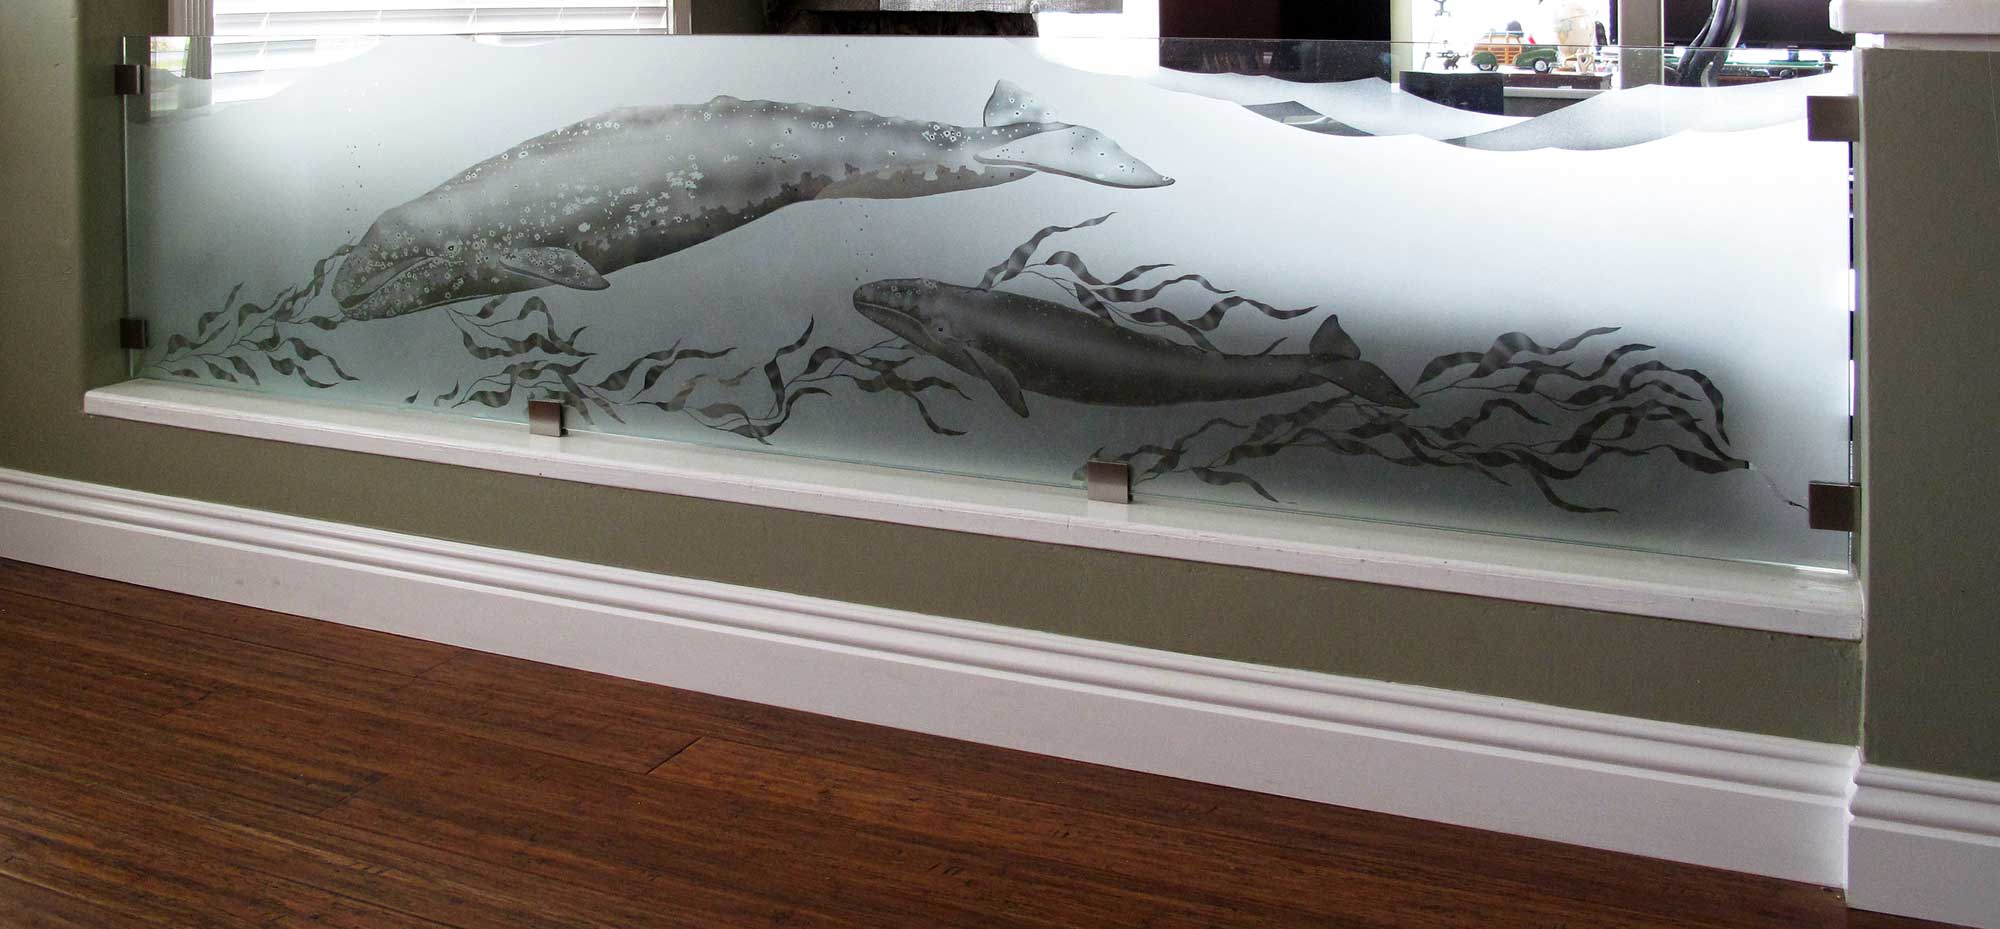 Wall divider with grey whale in etched glass